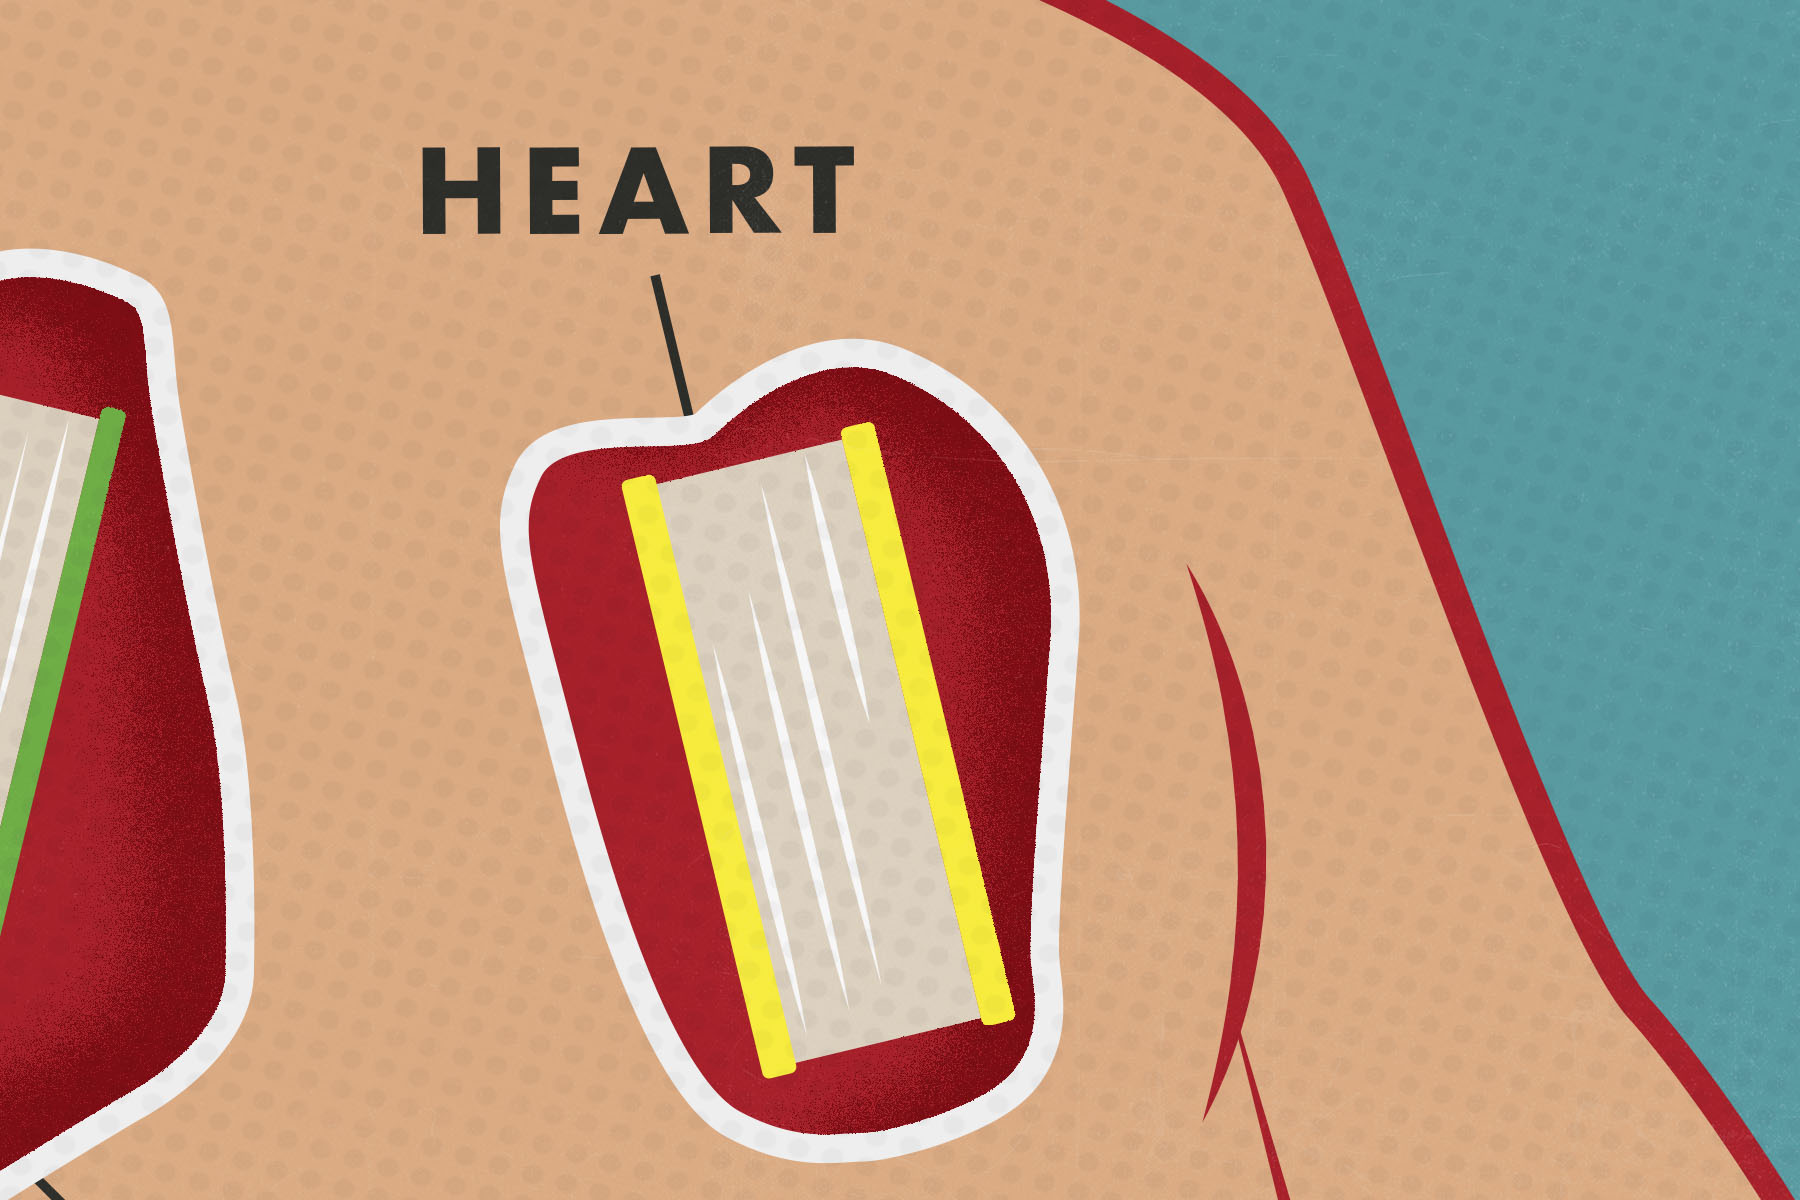 A boardgame-style illustration of books as a heart